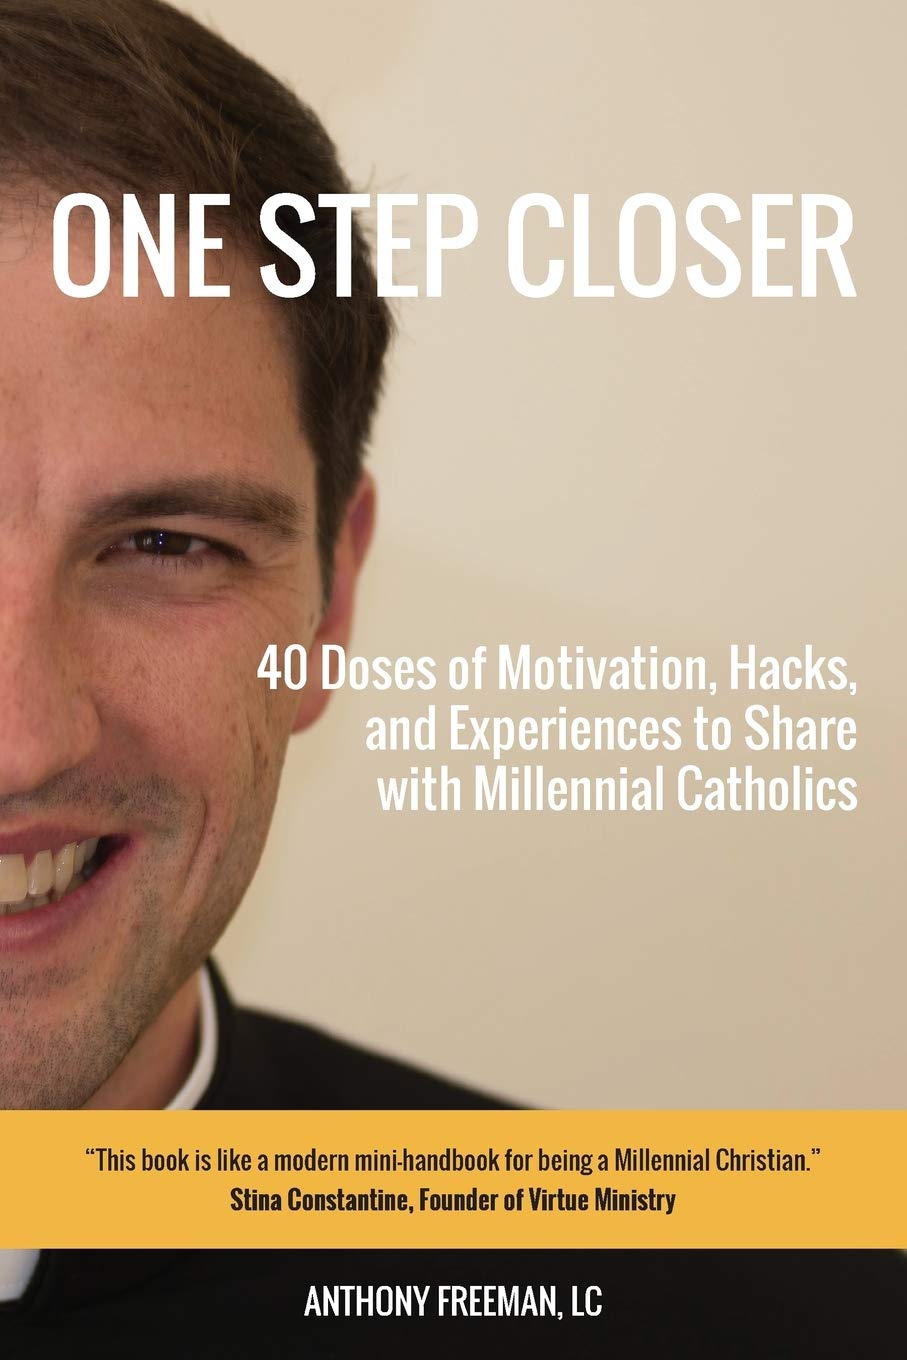 One Step Closer: 40 Doses of Motivation, Hacks, and Experiences to Share with Millennial Catholics